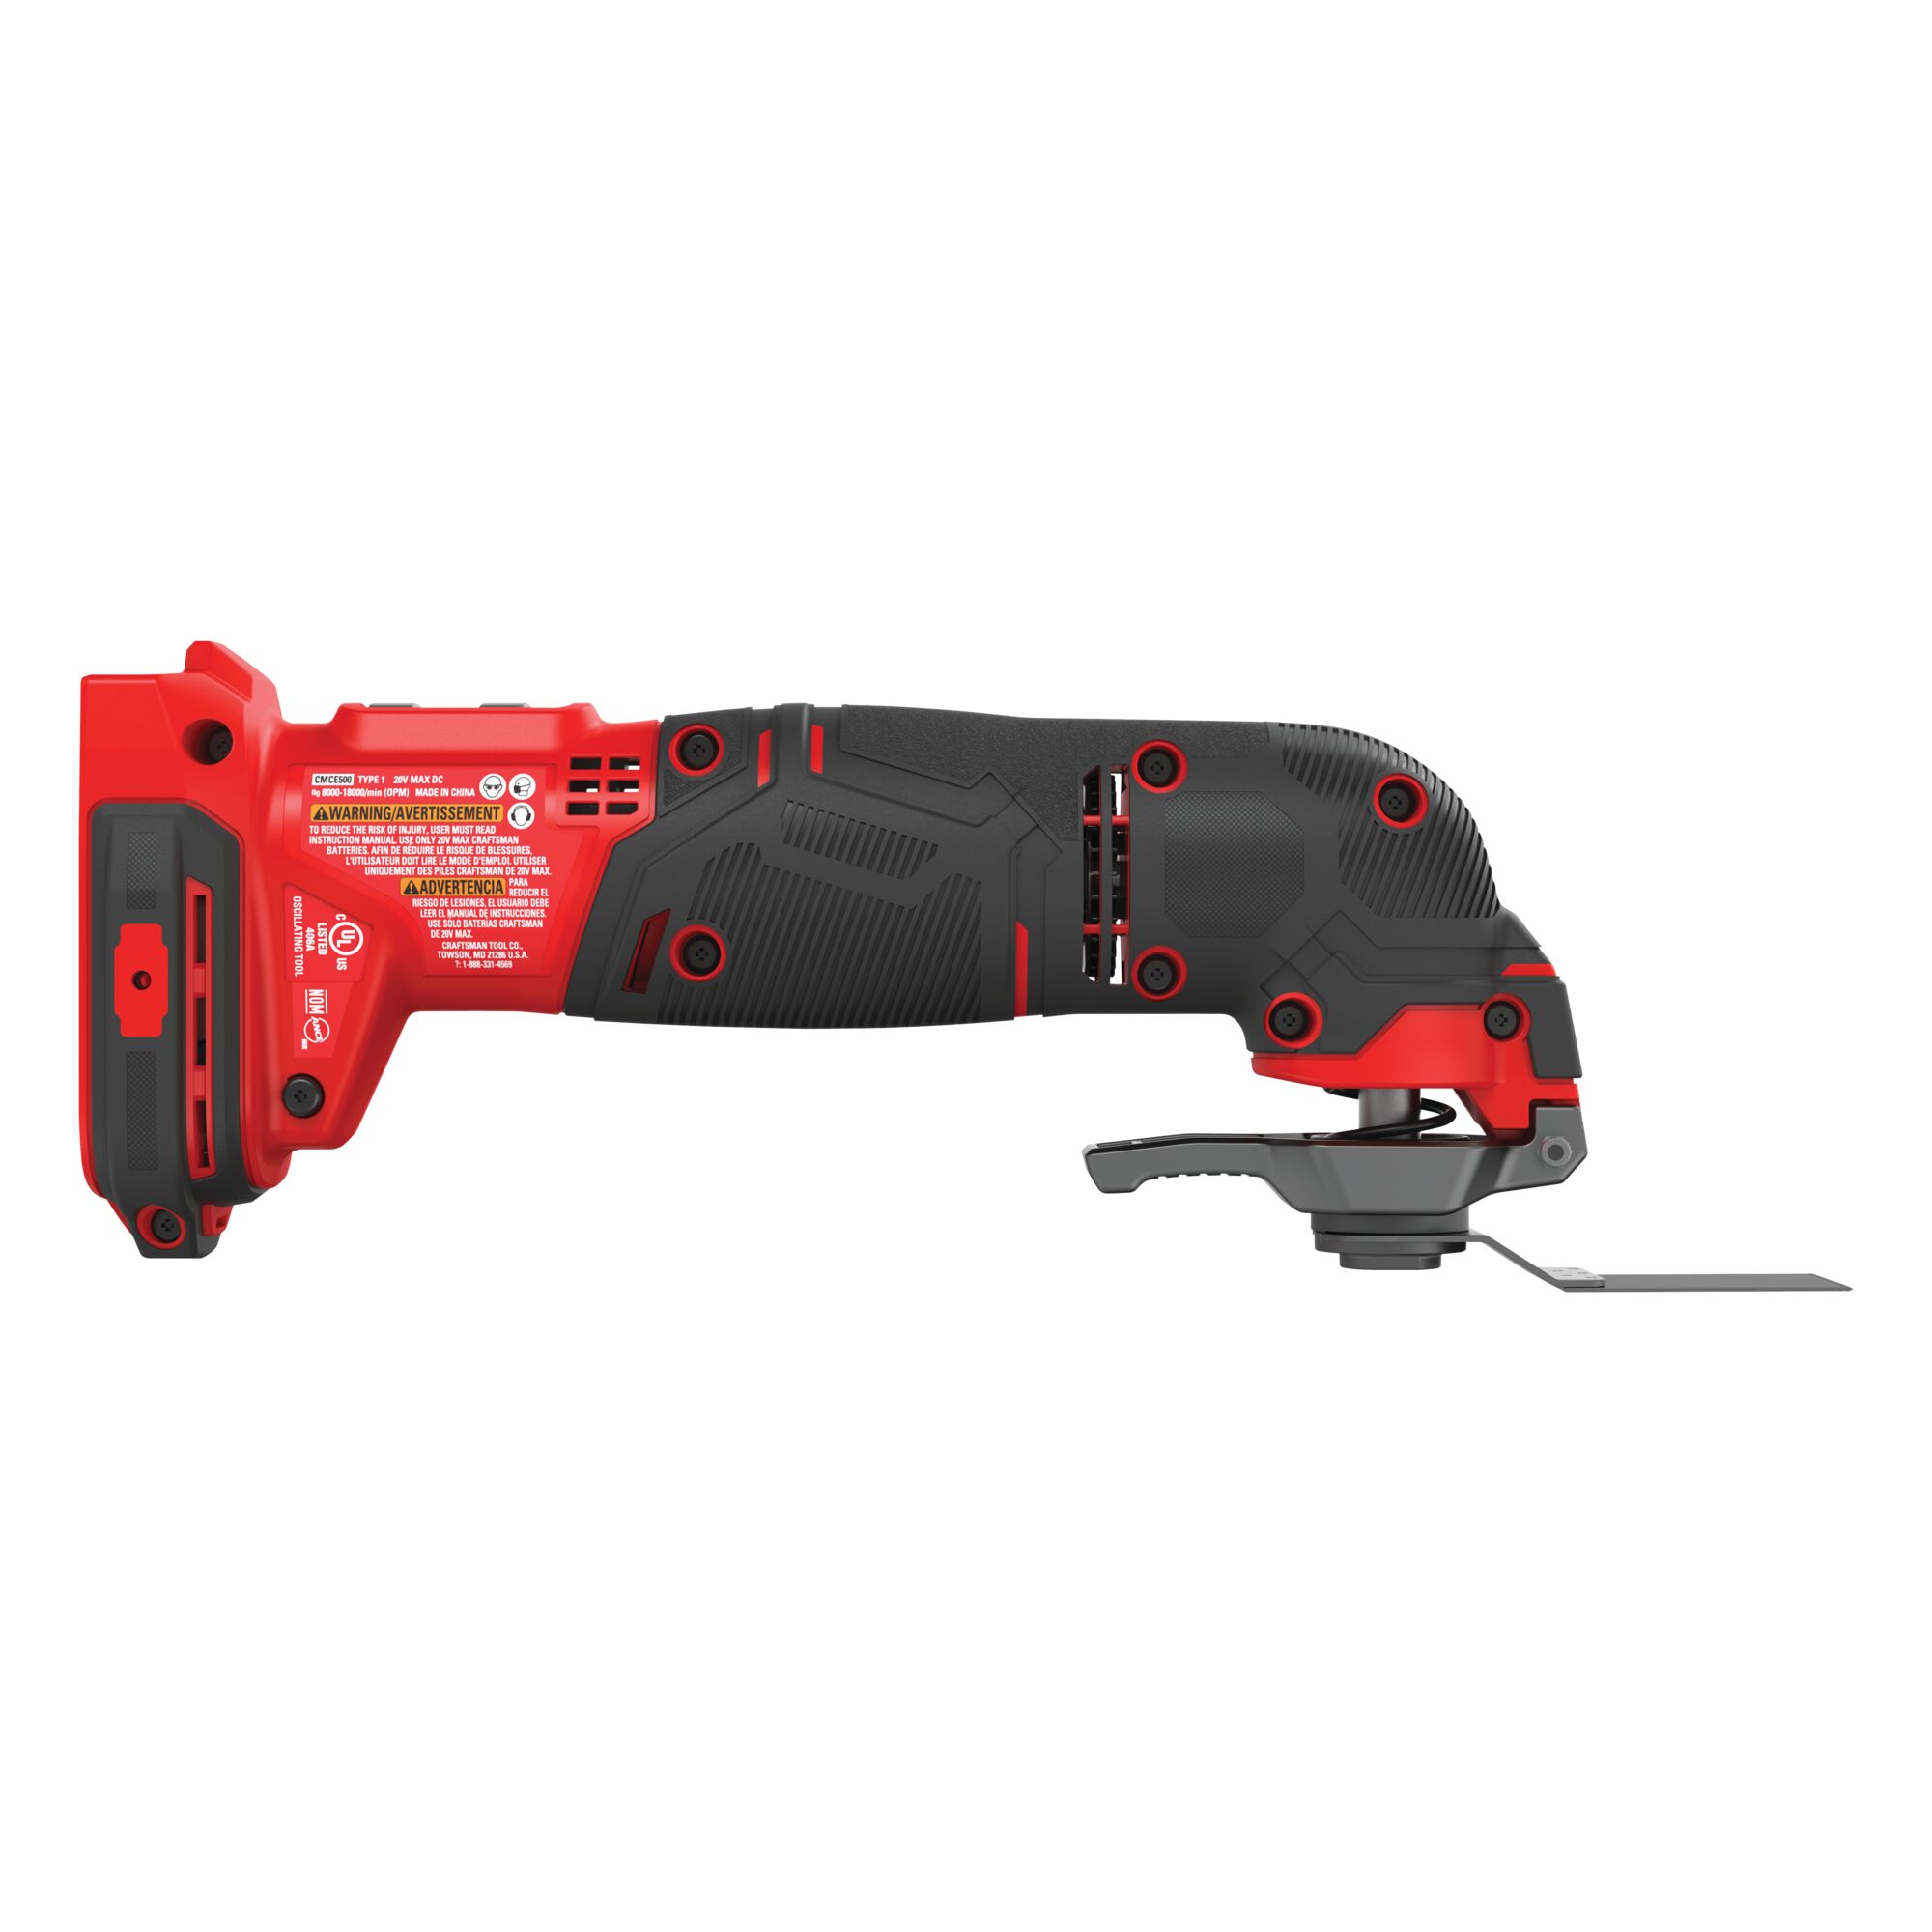 Left profile of cordless oscillating tool tool only.